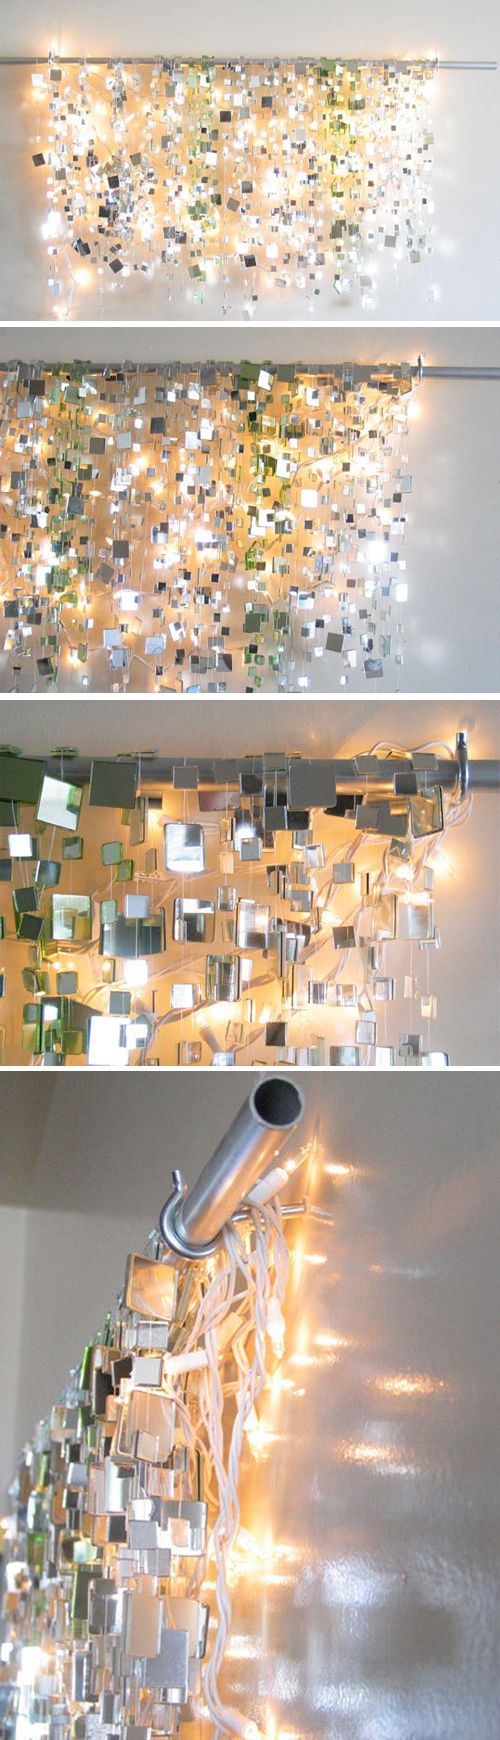 Small mirror tiles glued to fishing line with  lights behind. This is fantastic.